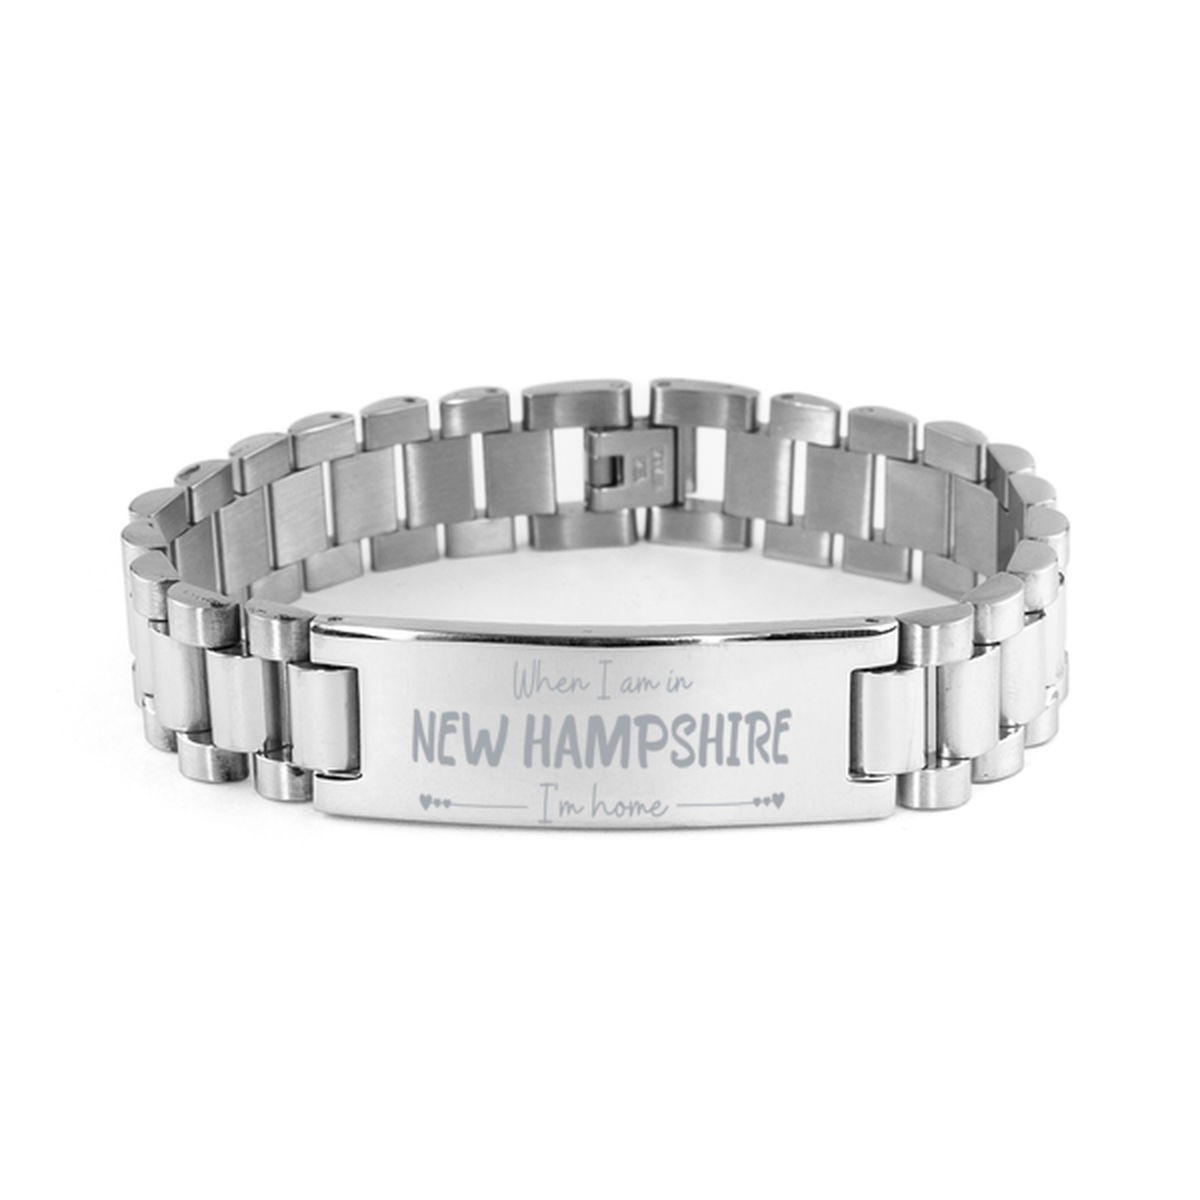 When I am in New Hampshire I'm home Ladder Stainless Steel Bracelet, Cheap Gifts For New Hampshire, State New Hampshire Birthday Gifts for Friends Coworker